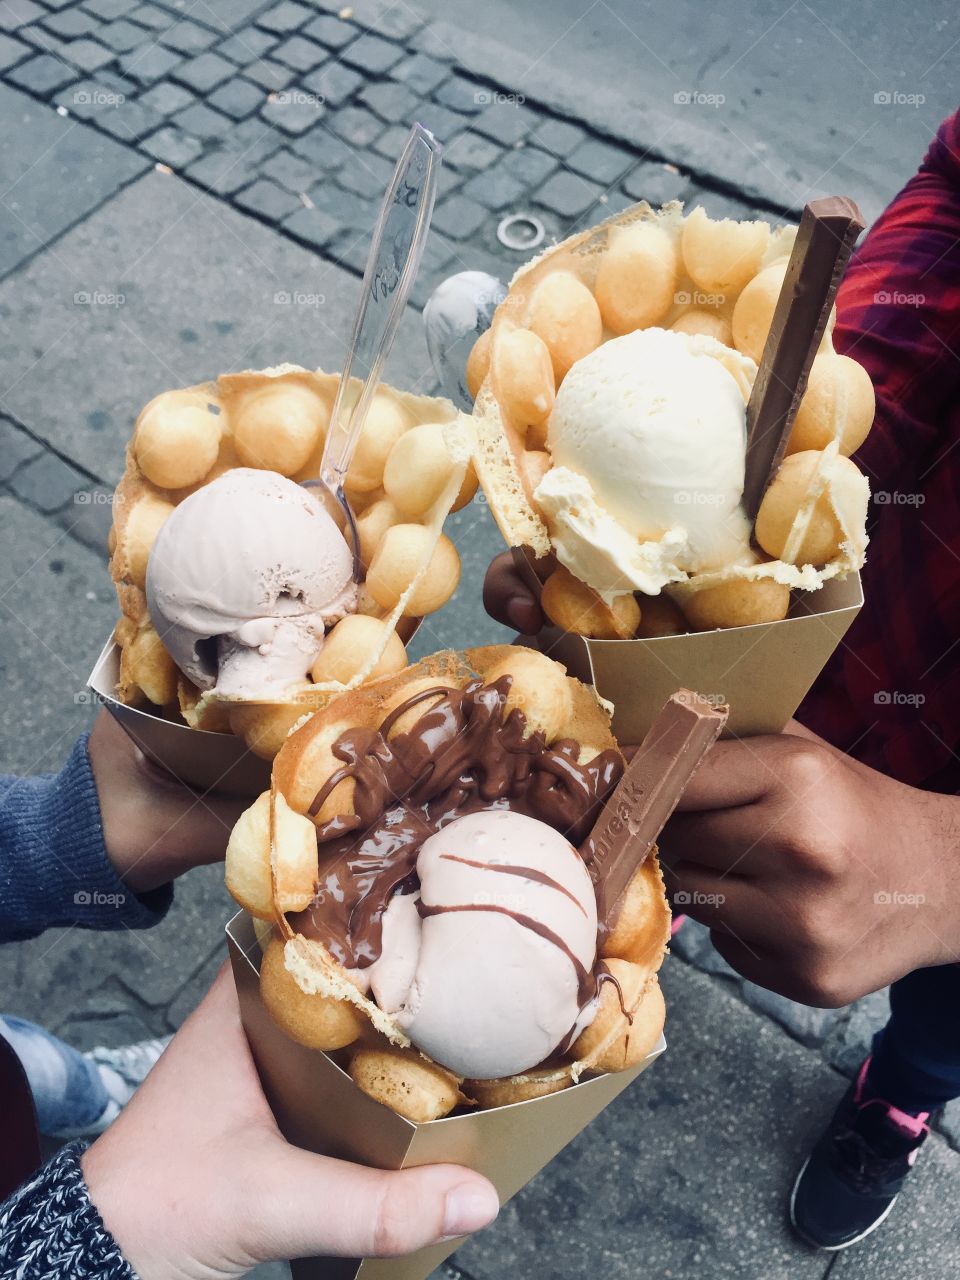 Three girls hold bubble waffle cones filled with icecream and chocolatey toppings 